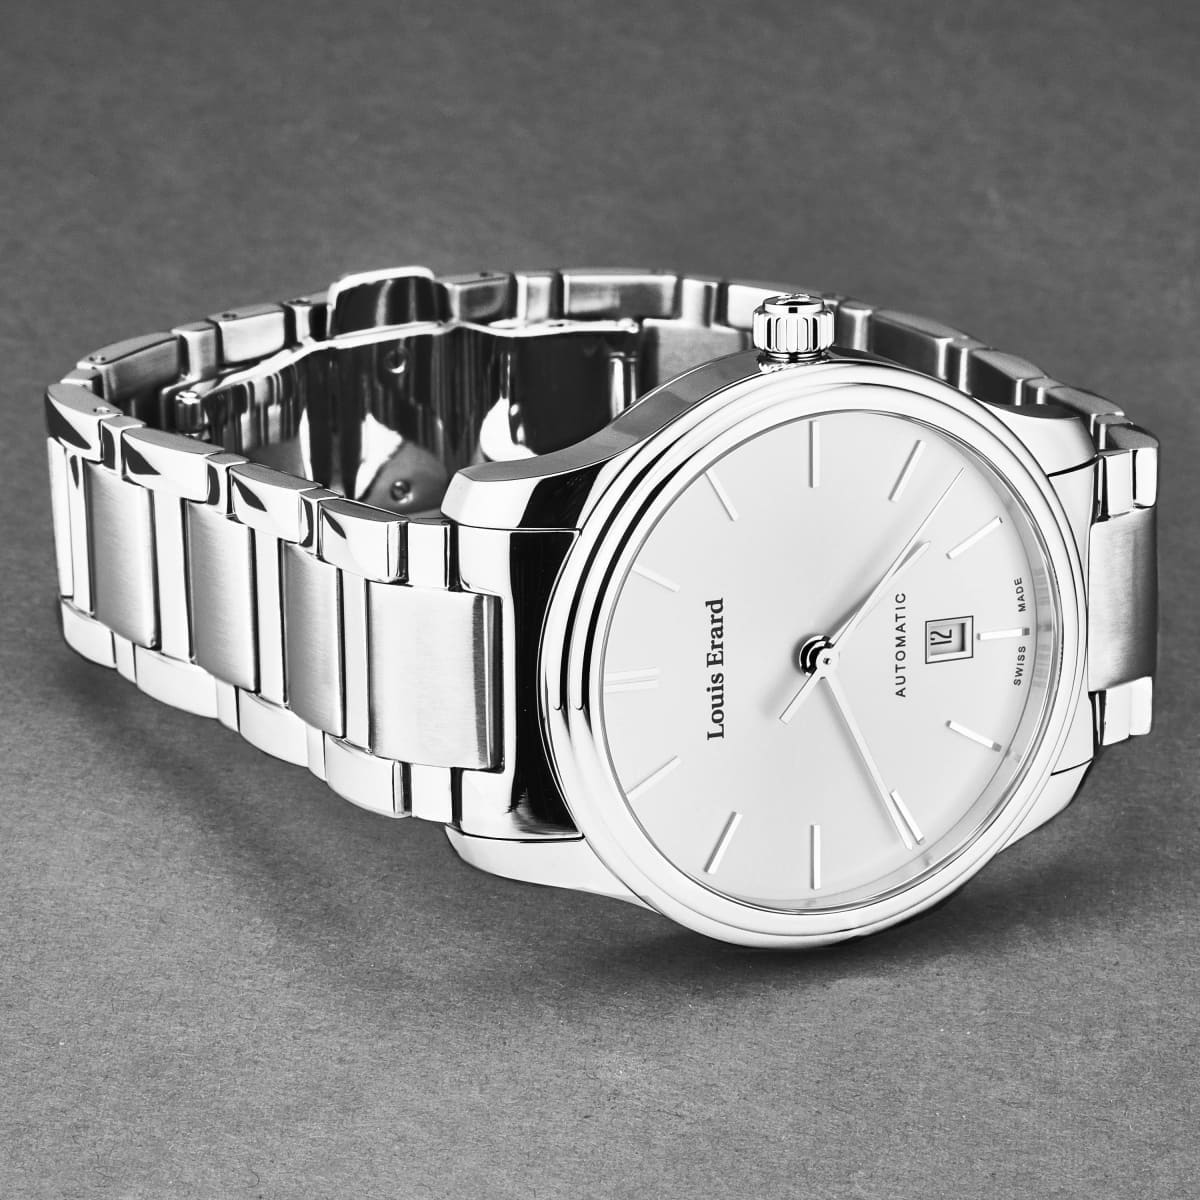 Louis Erard Men’s ’Heritage’ Silver Dial Stainless Steel Bracelet Automatic Watch 67278AA11.BMA05 - On sale